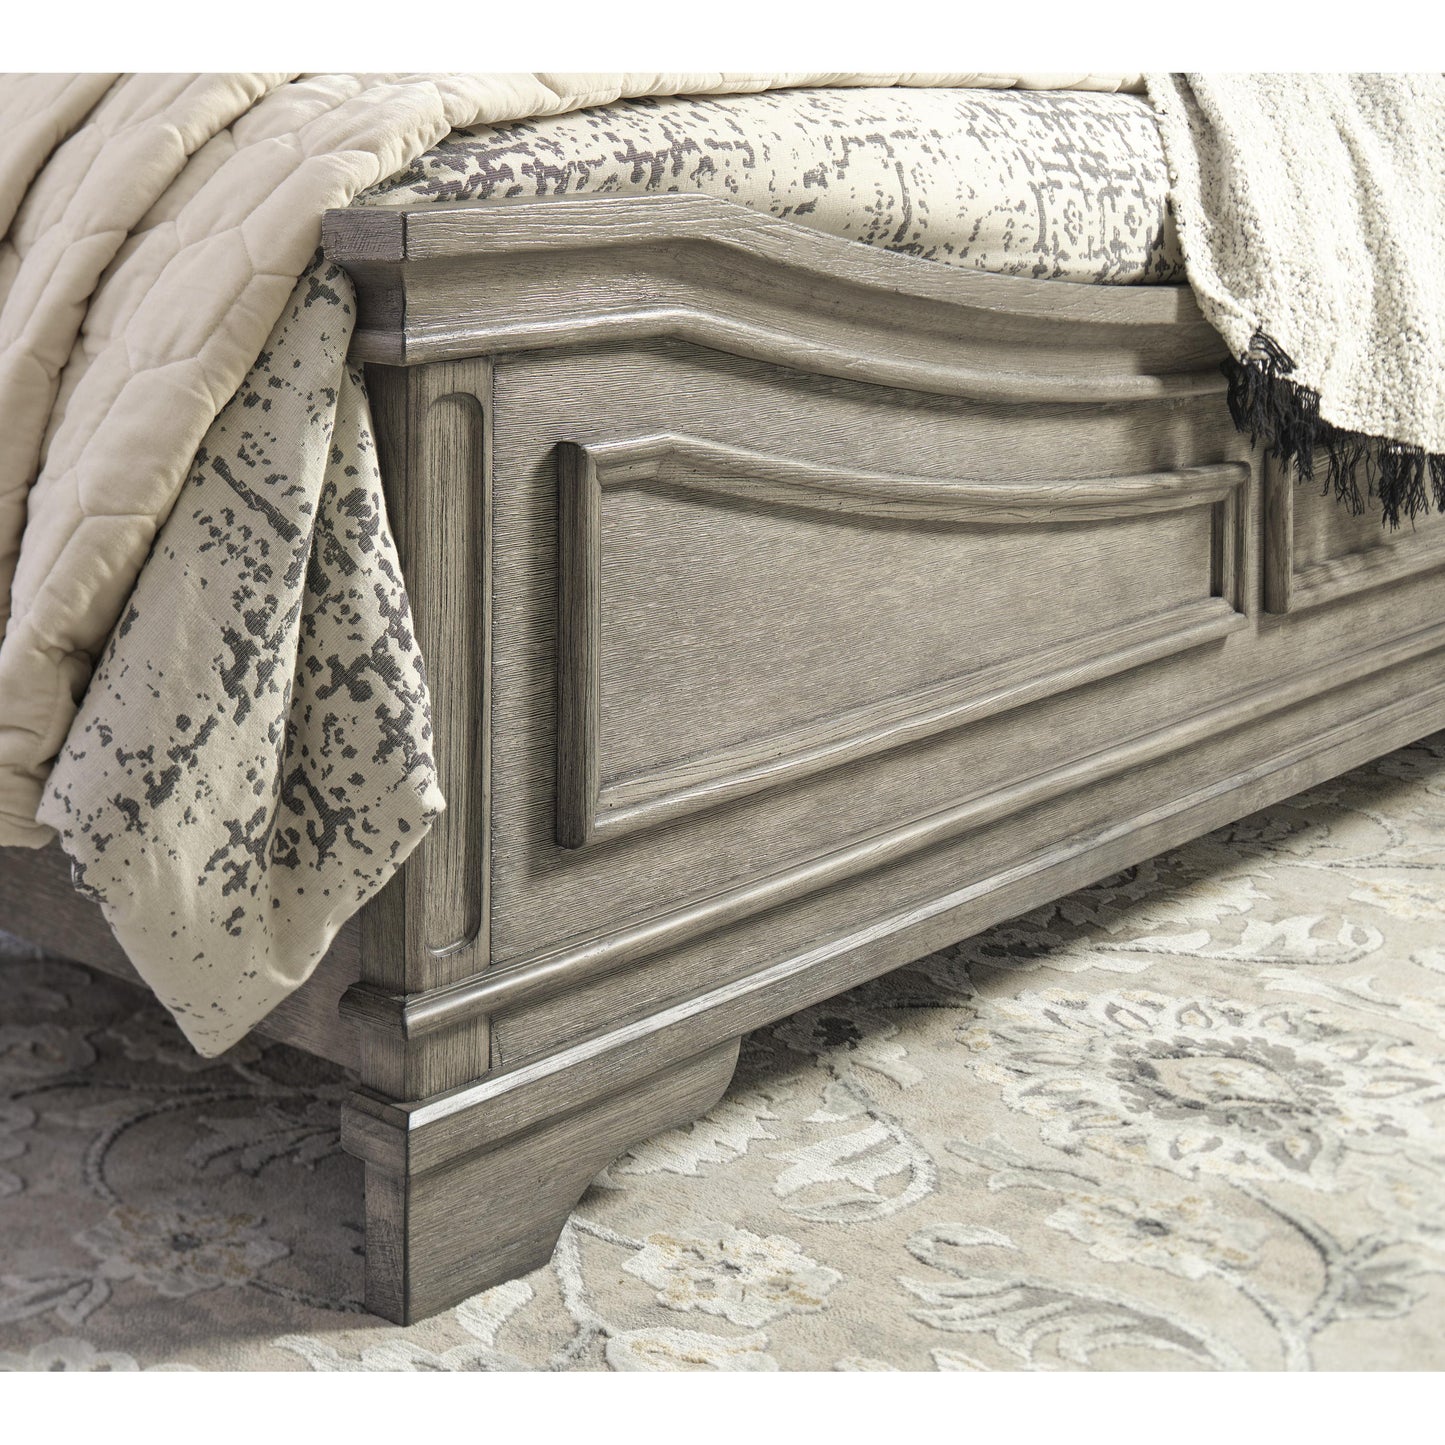 Signature Design by Ashley Lodenbay Queen Panel Bed B751-57/B751-54/B751-96